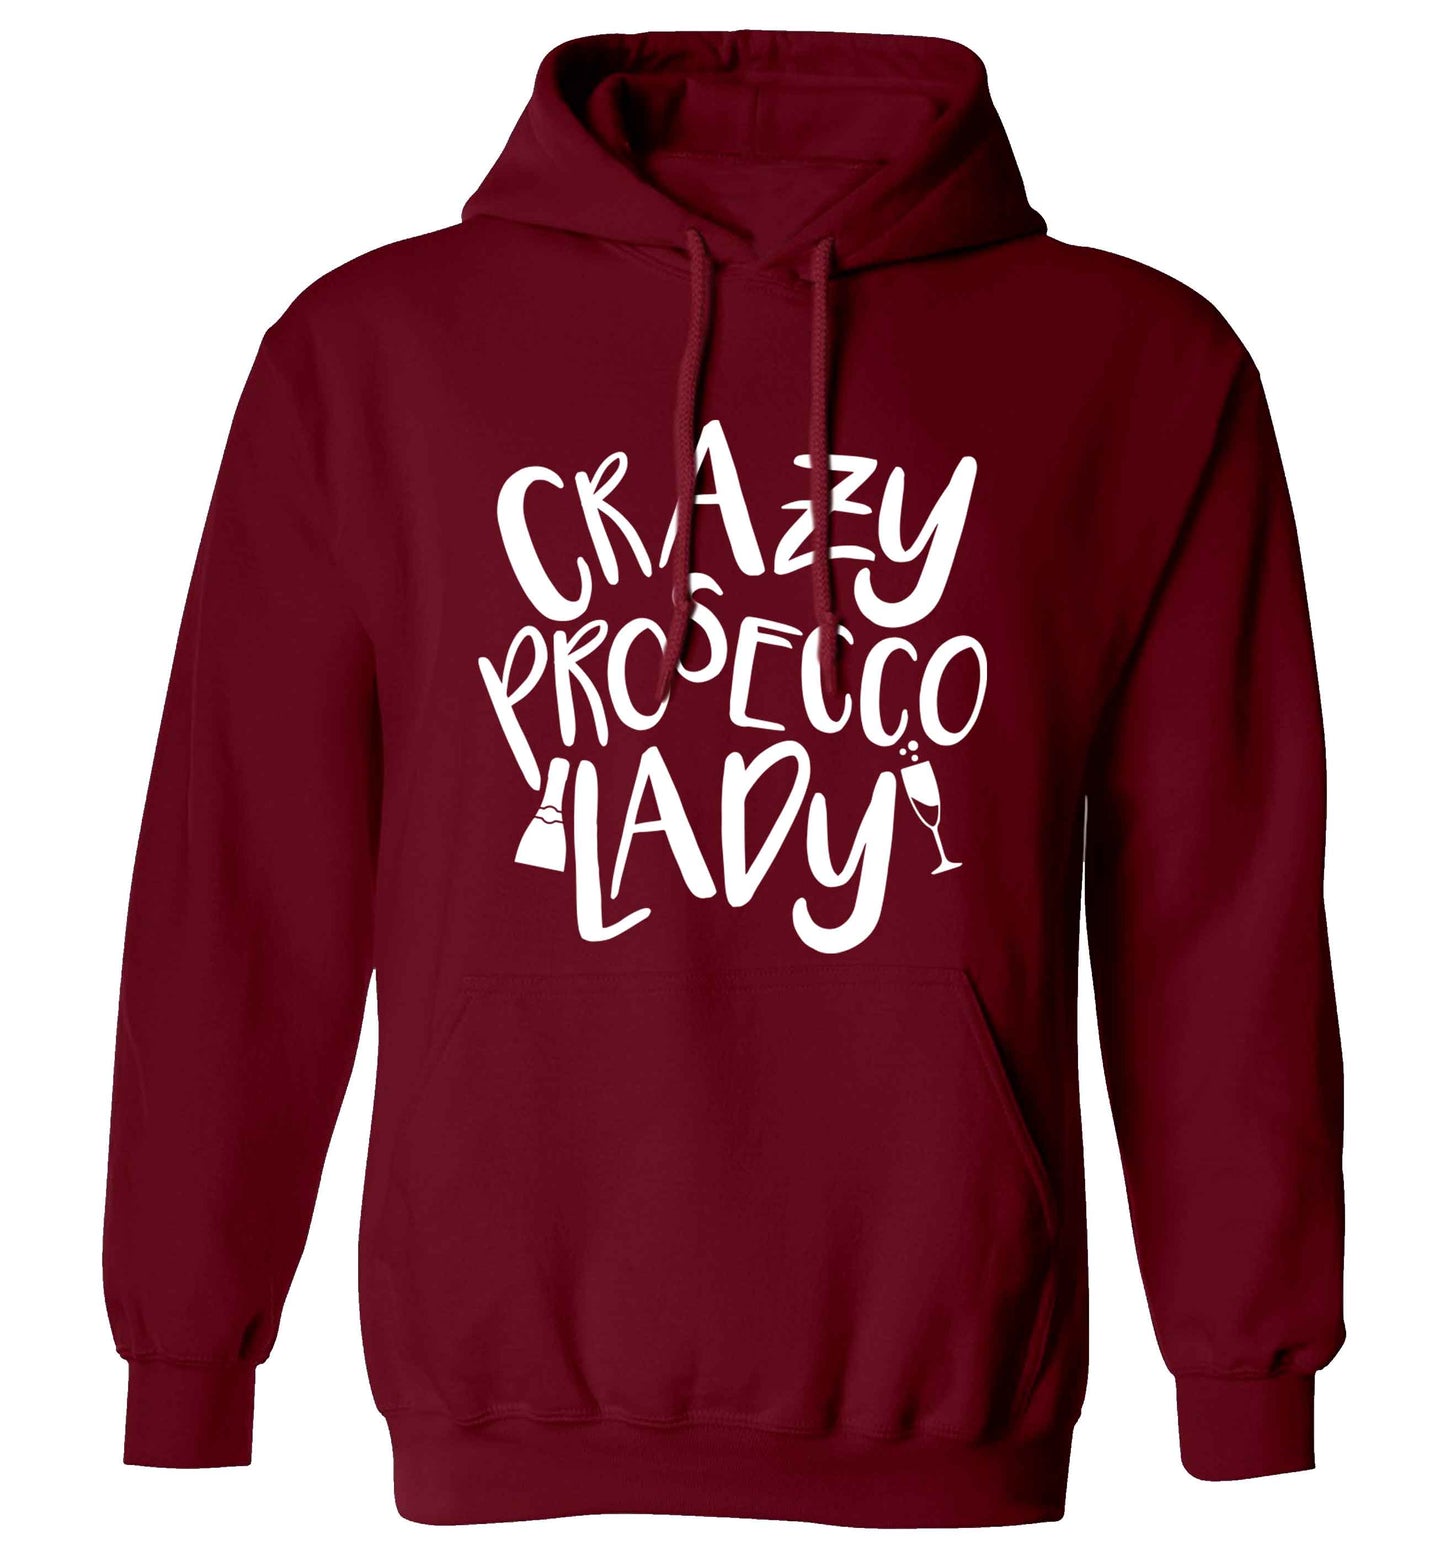 Crazy prosecco lady adults unisex maroon hoodie 2XL